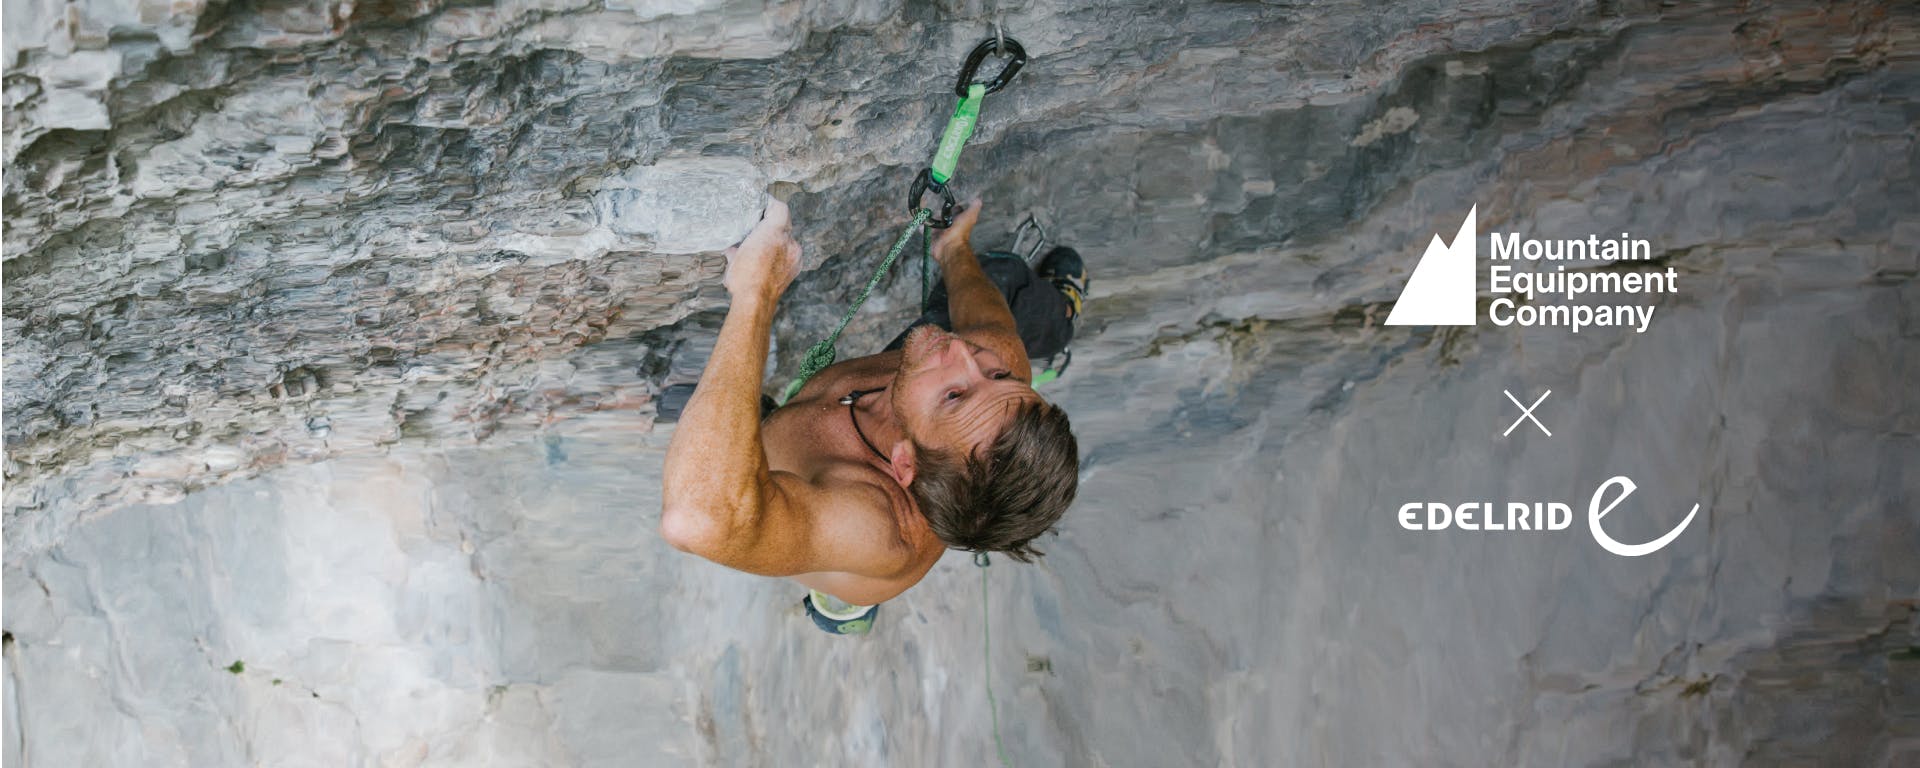 Evening talk with Tommy Caldwell